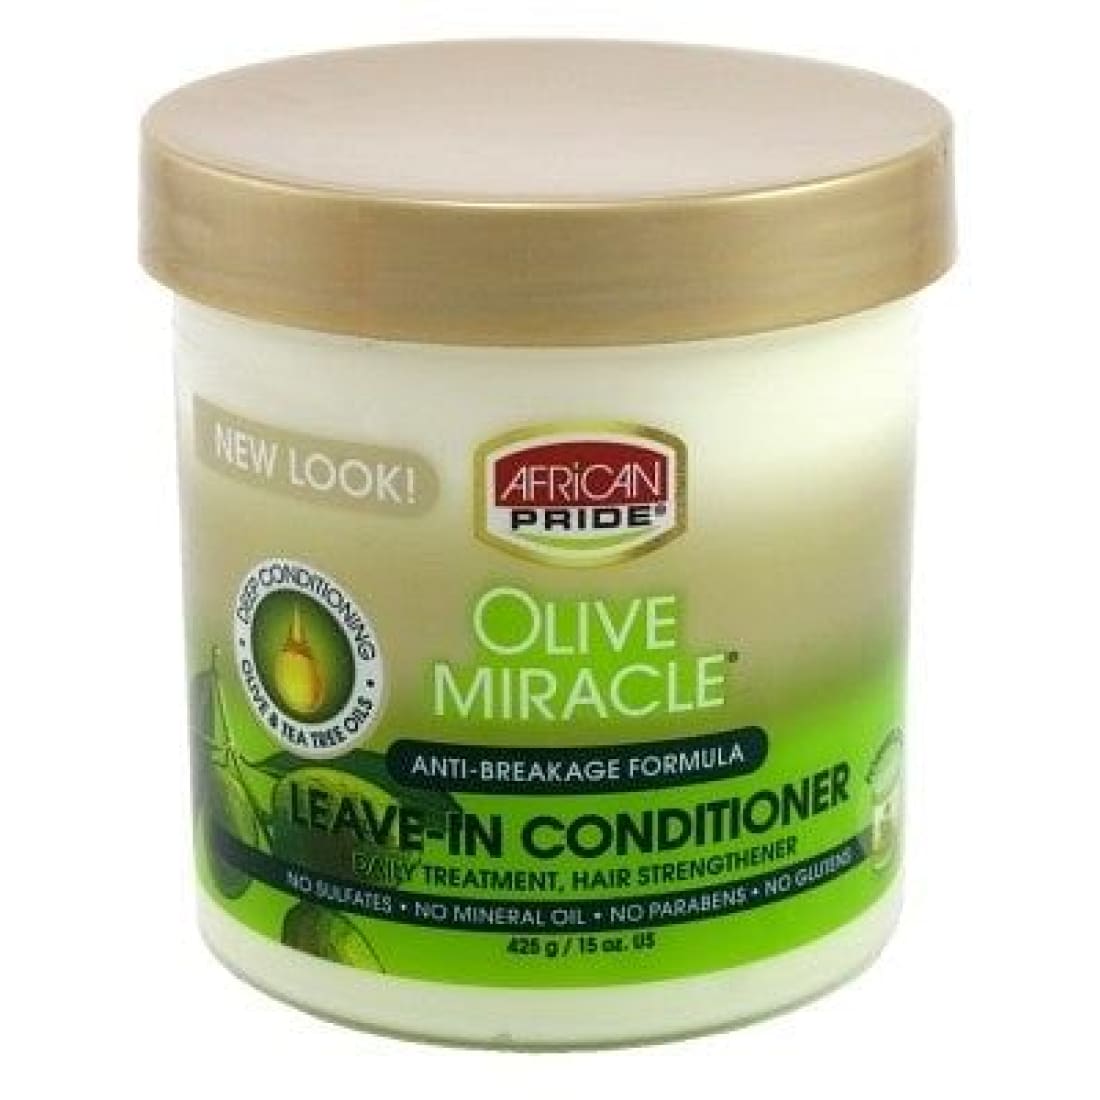 African Pride Olive Miracle Conditioner Leave-In 15oz - Hair